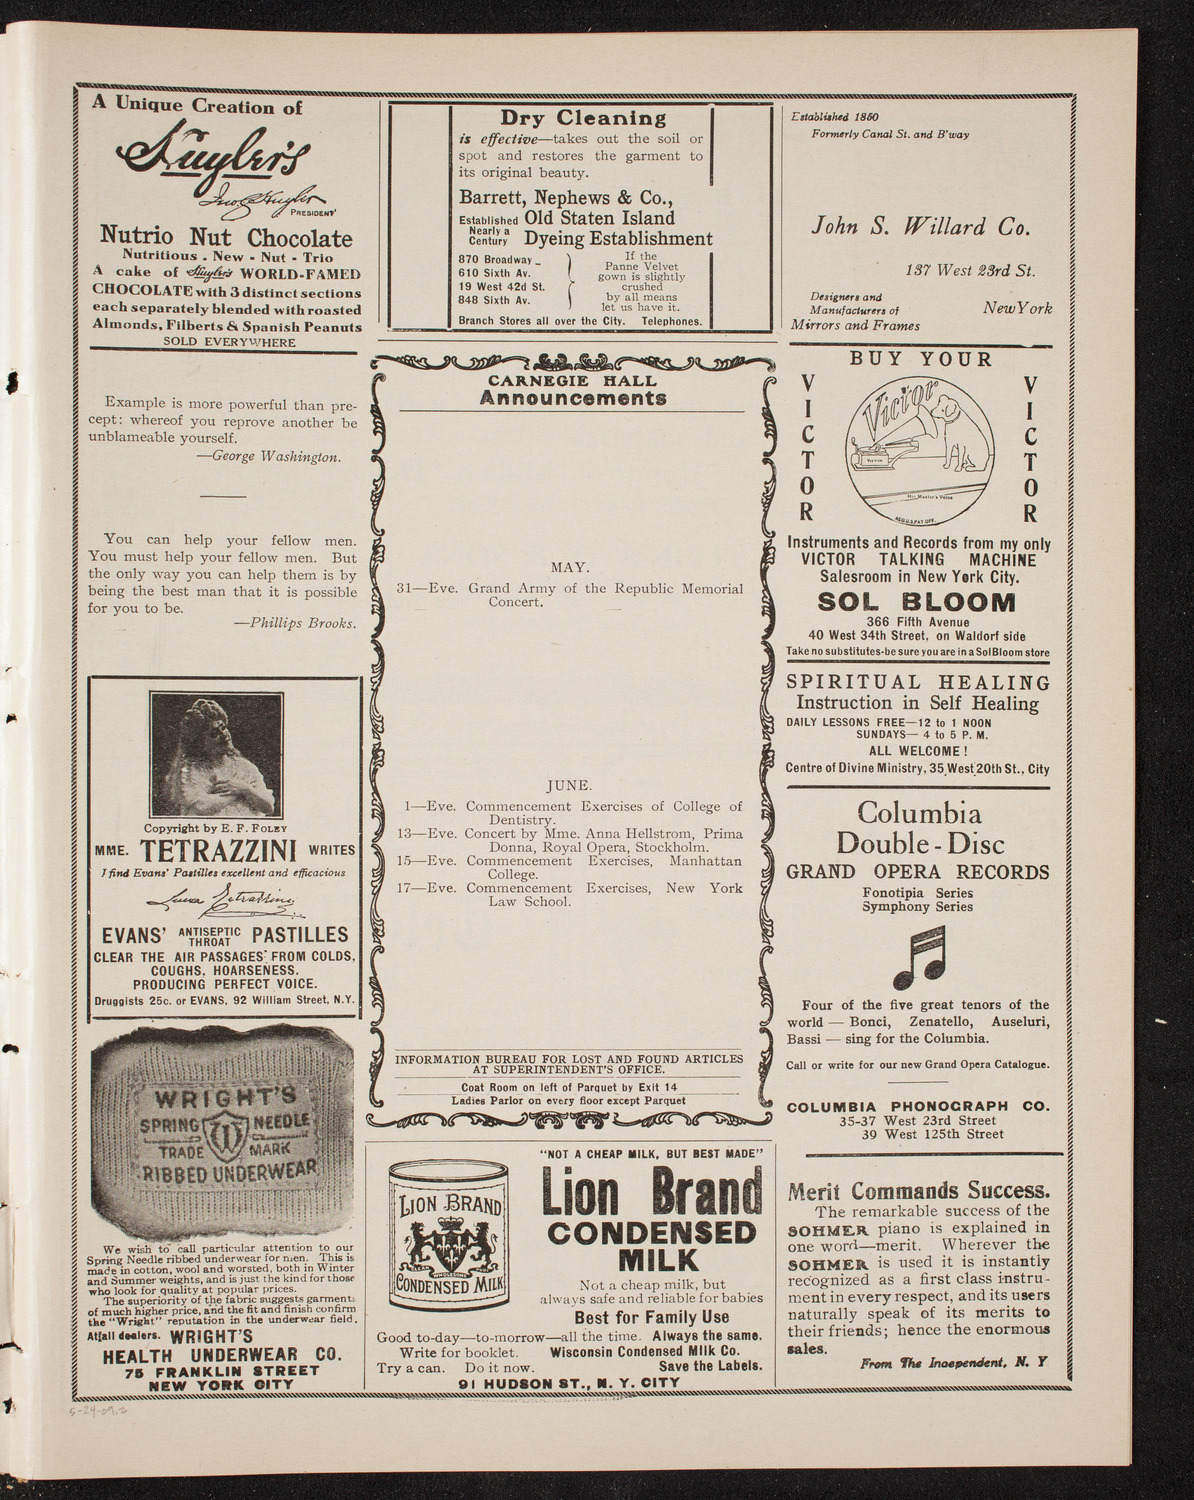 Graduation: Packard Commercial School, May 24, 1909, program page 3